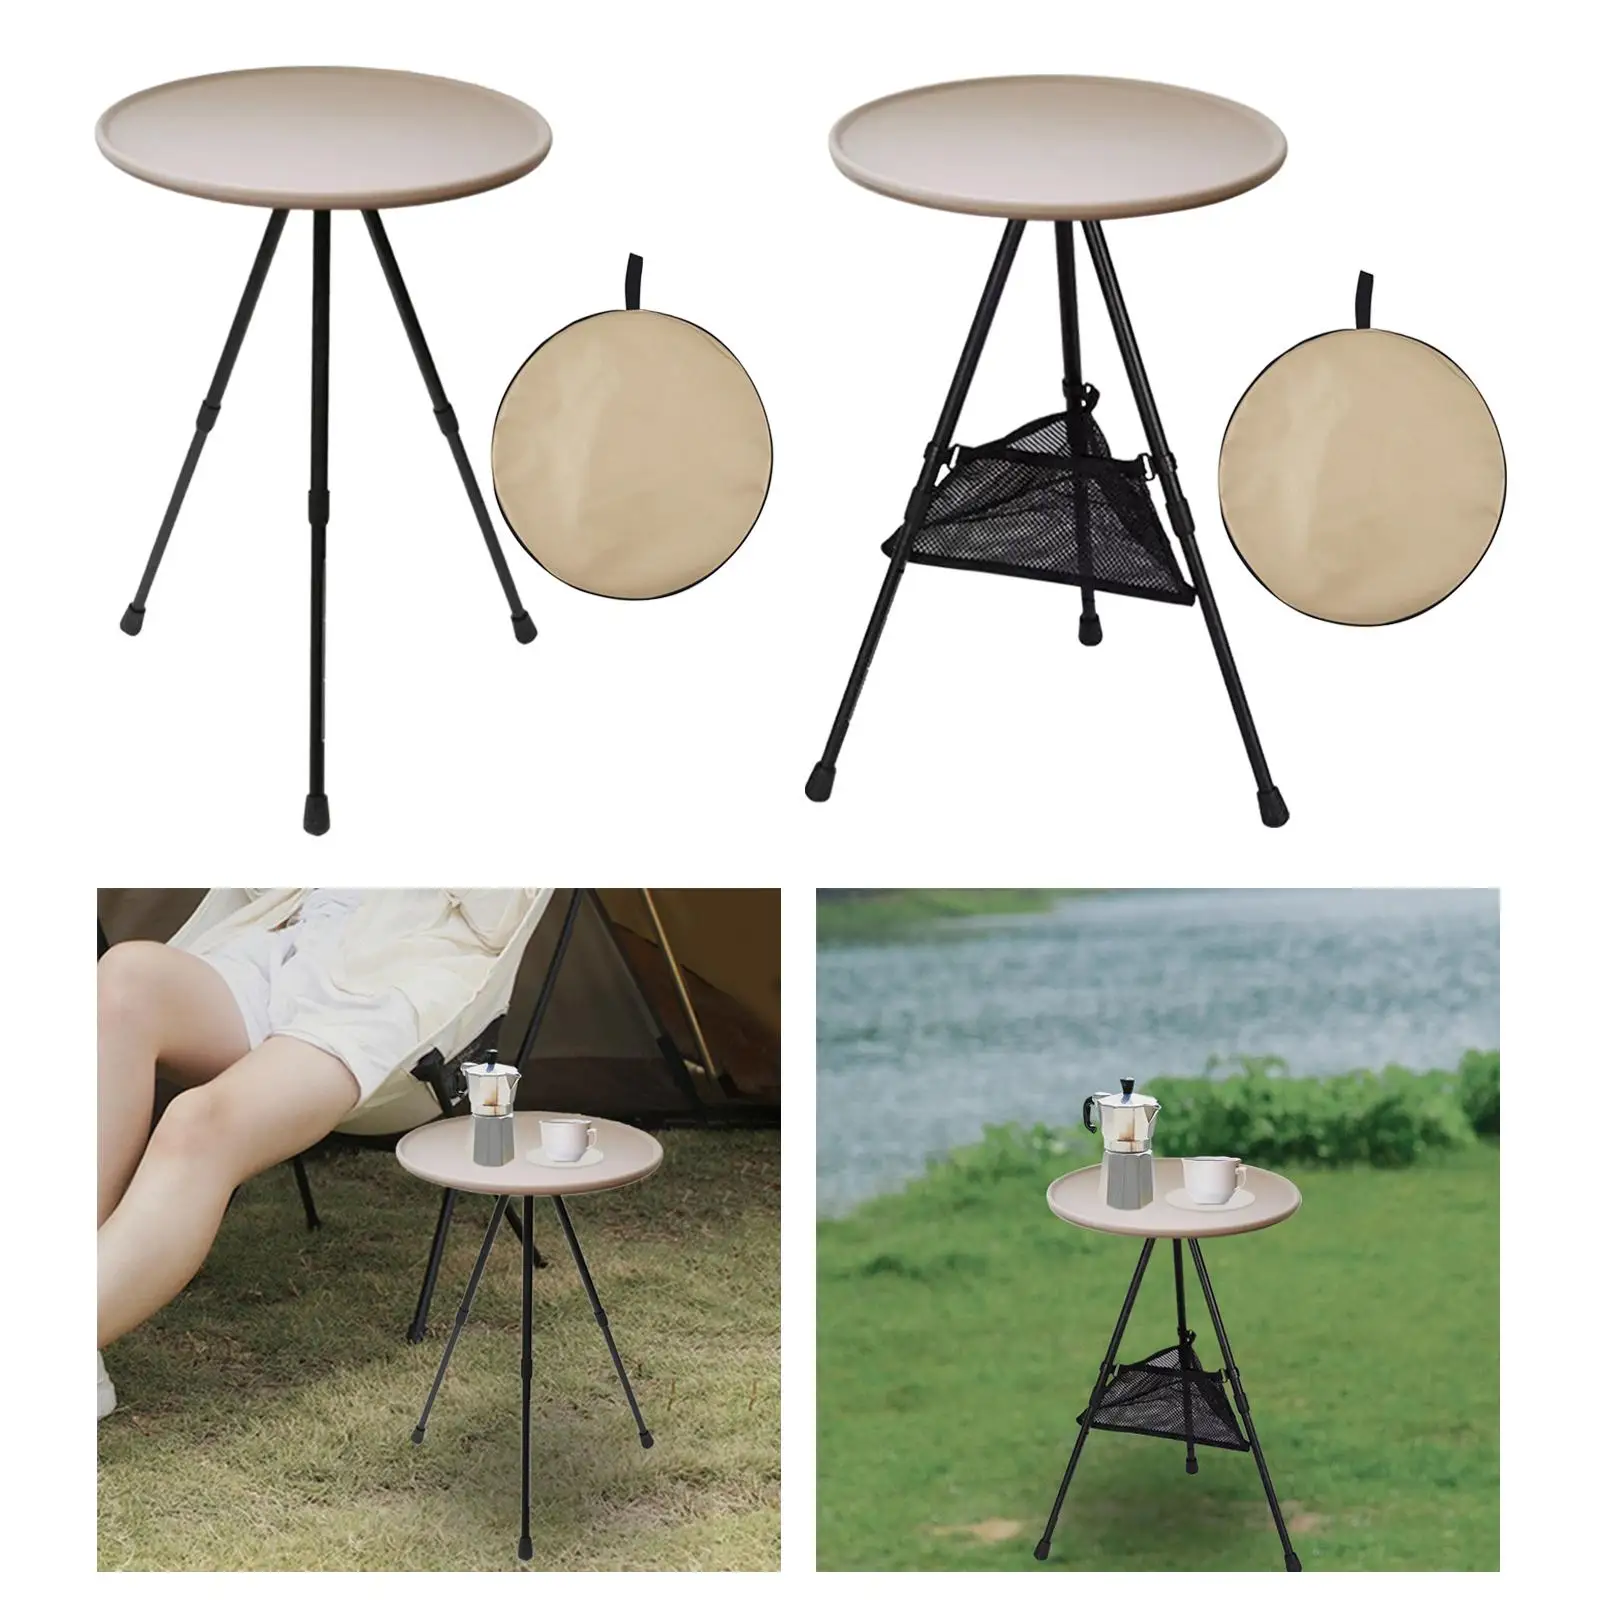 Outdoor Folding Round Table Portable Tea Coffee Camping Table Foldable Picnic Table for Hiking Picnic Travel Garden Climbing